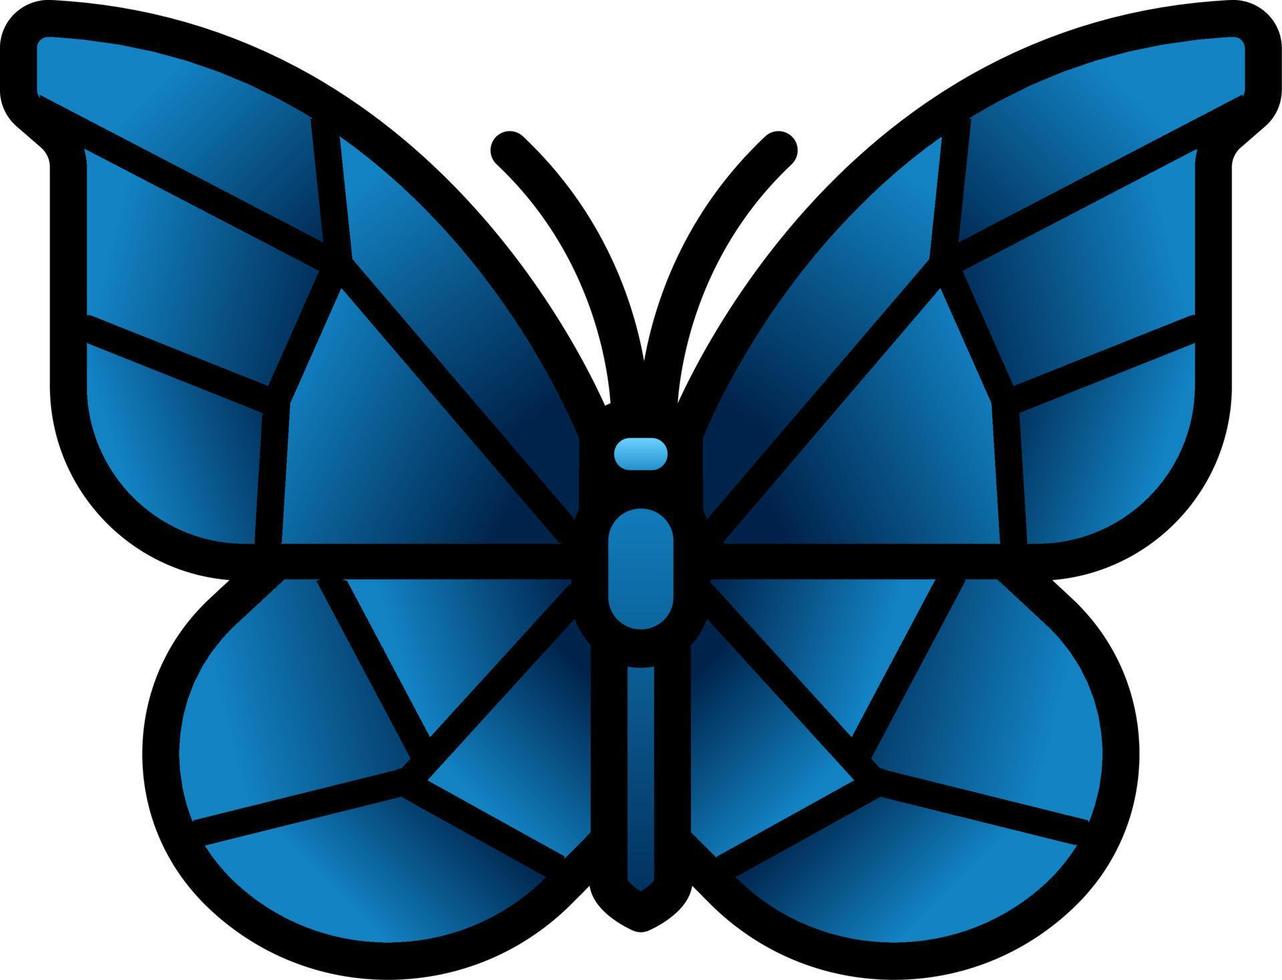 Butterfly icon for insect animal design. Clip art of blue butterfly for flying creature element. Vector illustration of beautiful animal for graphic resource design